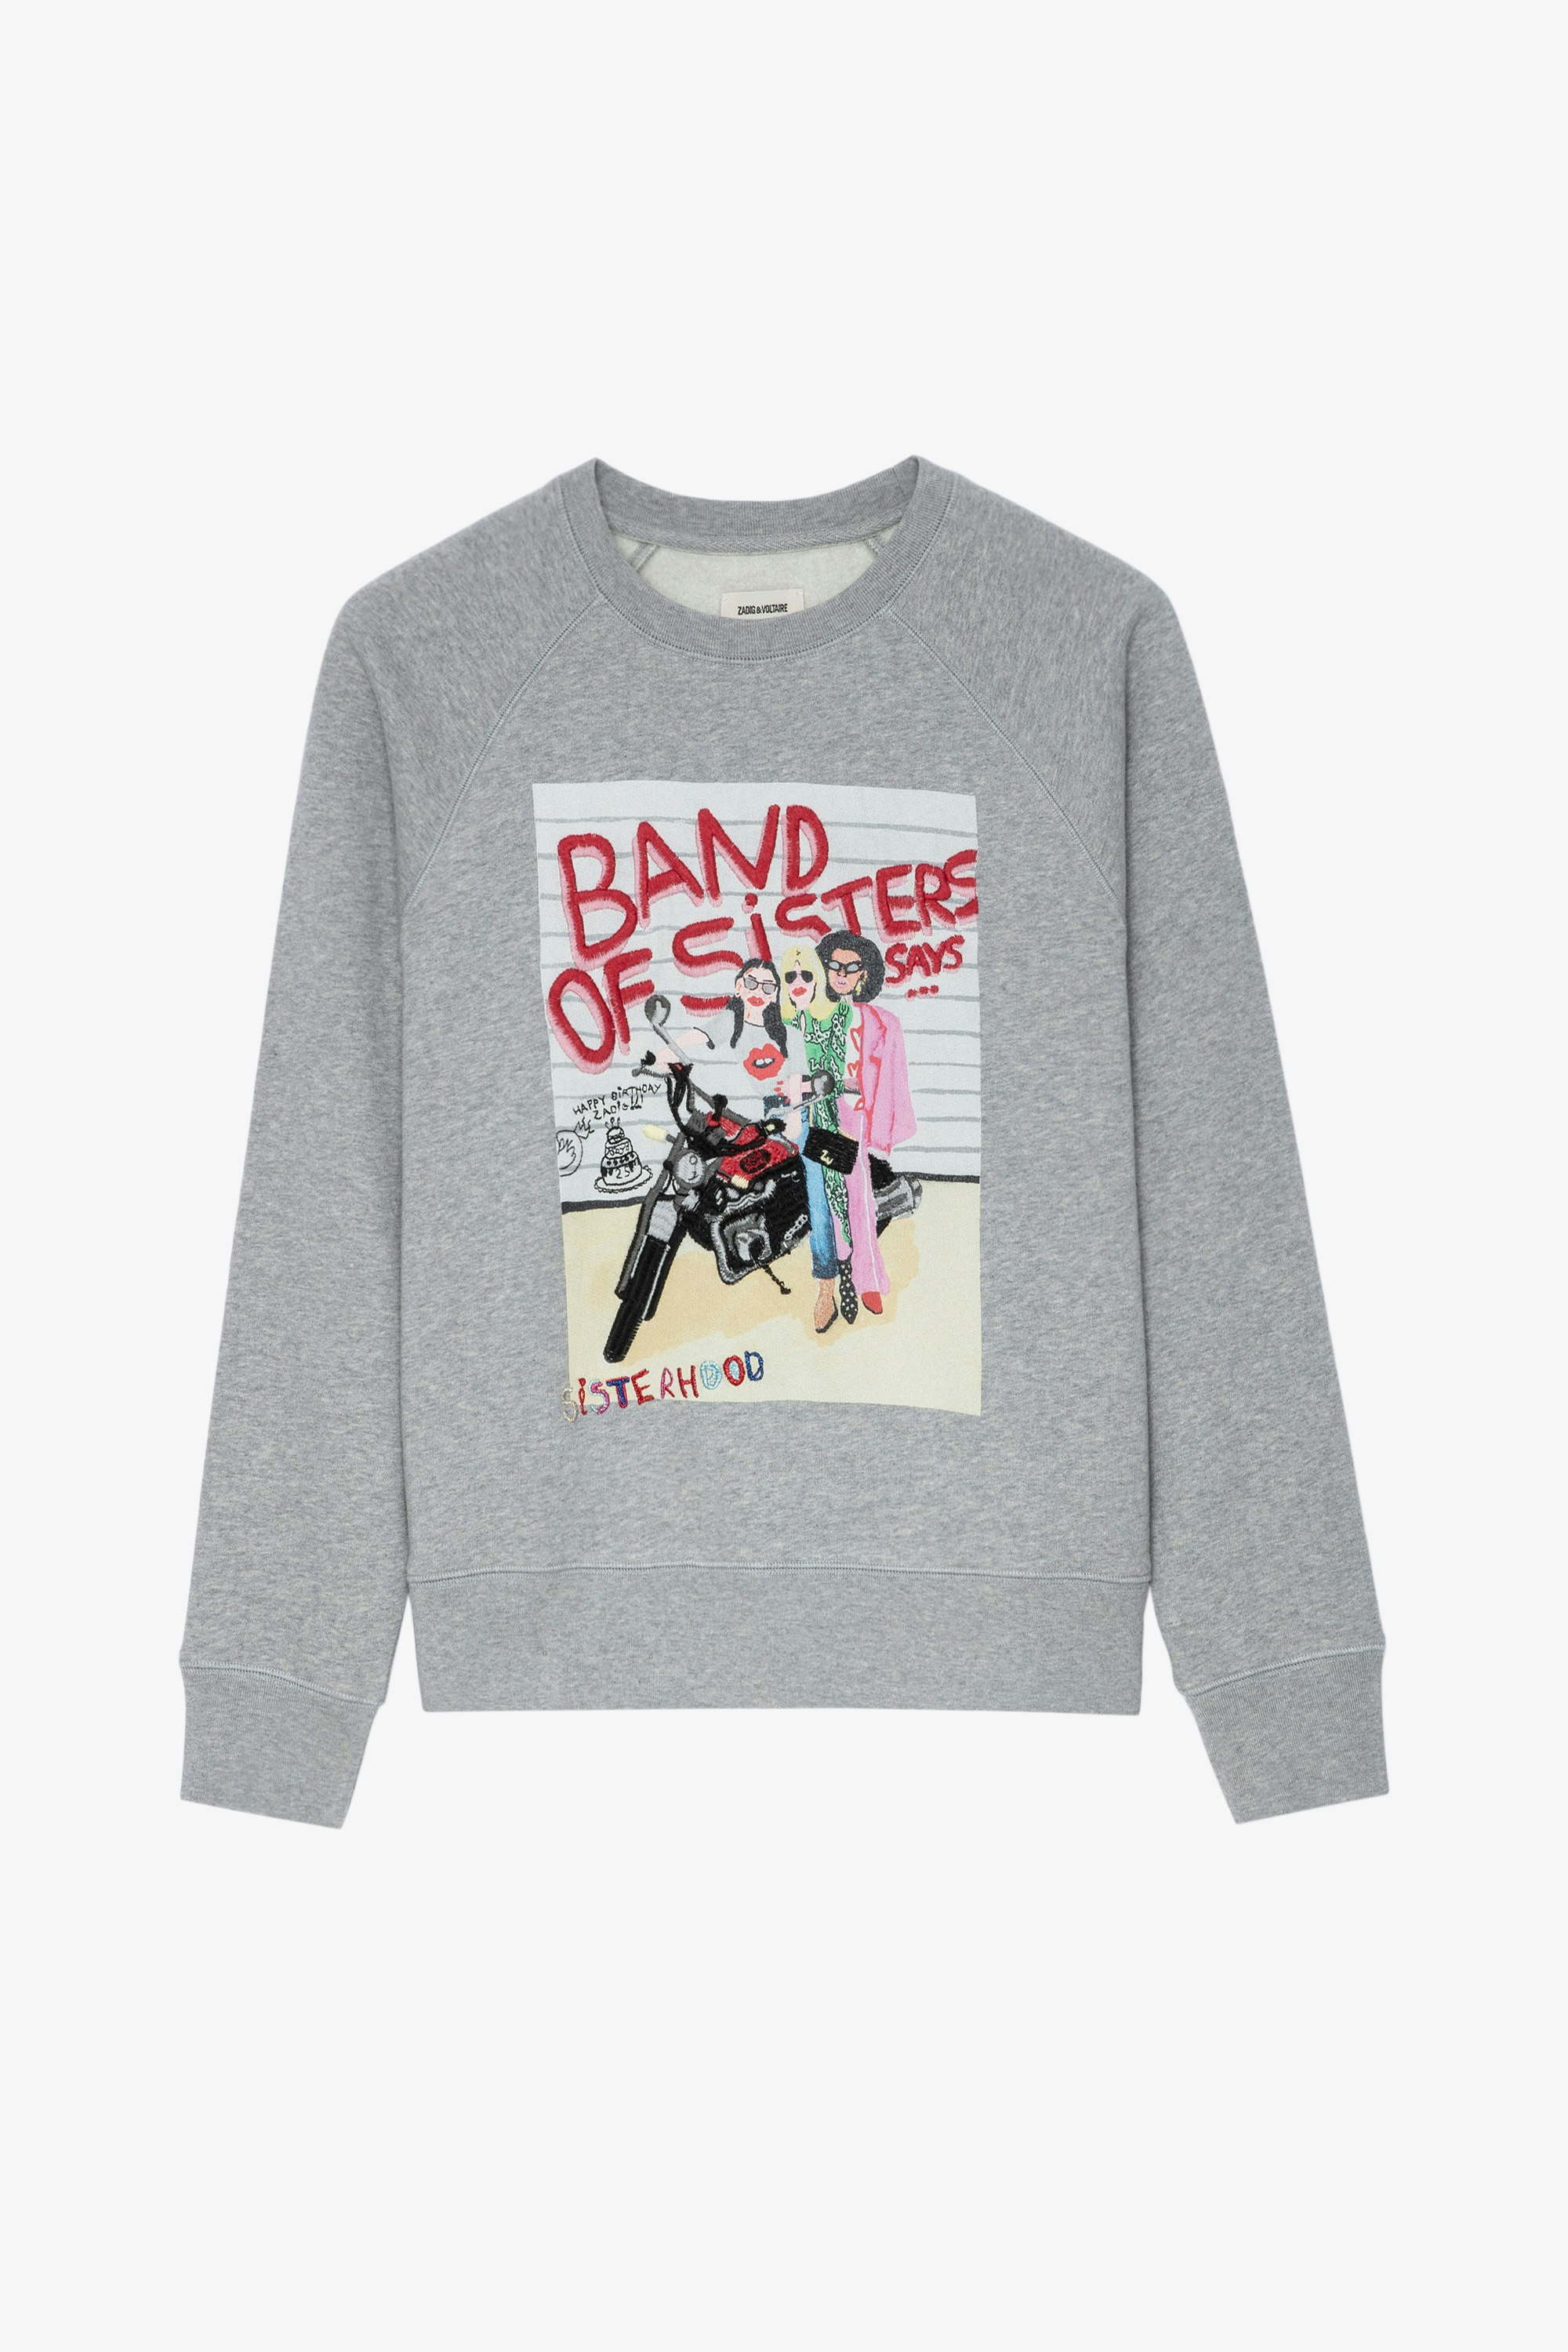 Band Of Sisters Upper スウェット Women’s grey marl cotton sweatshirt with Band of Sisters print